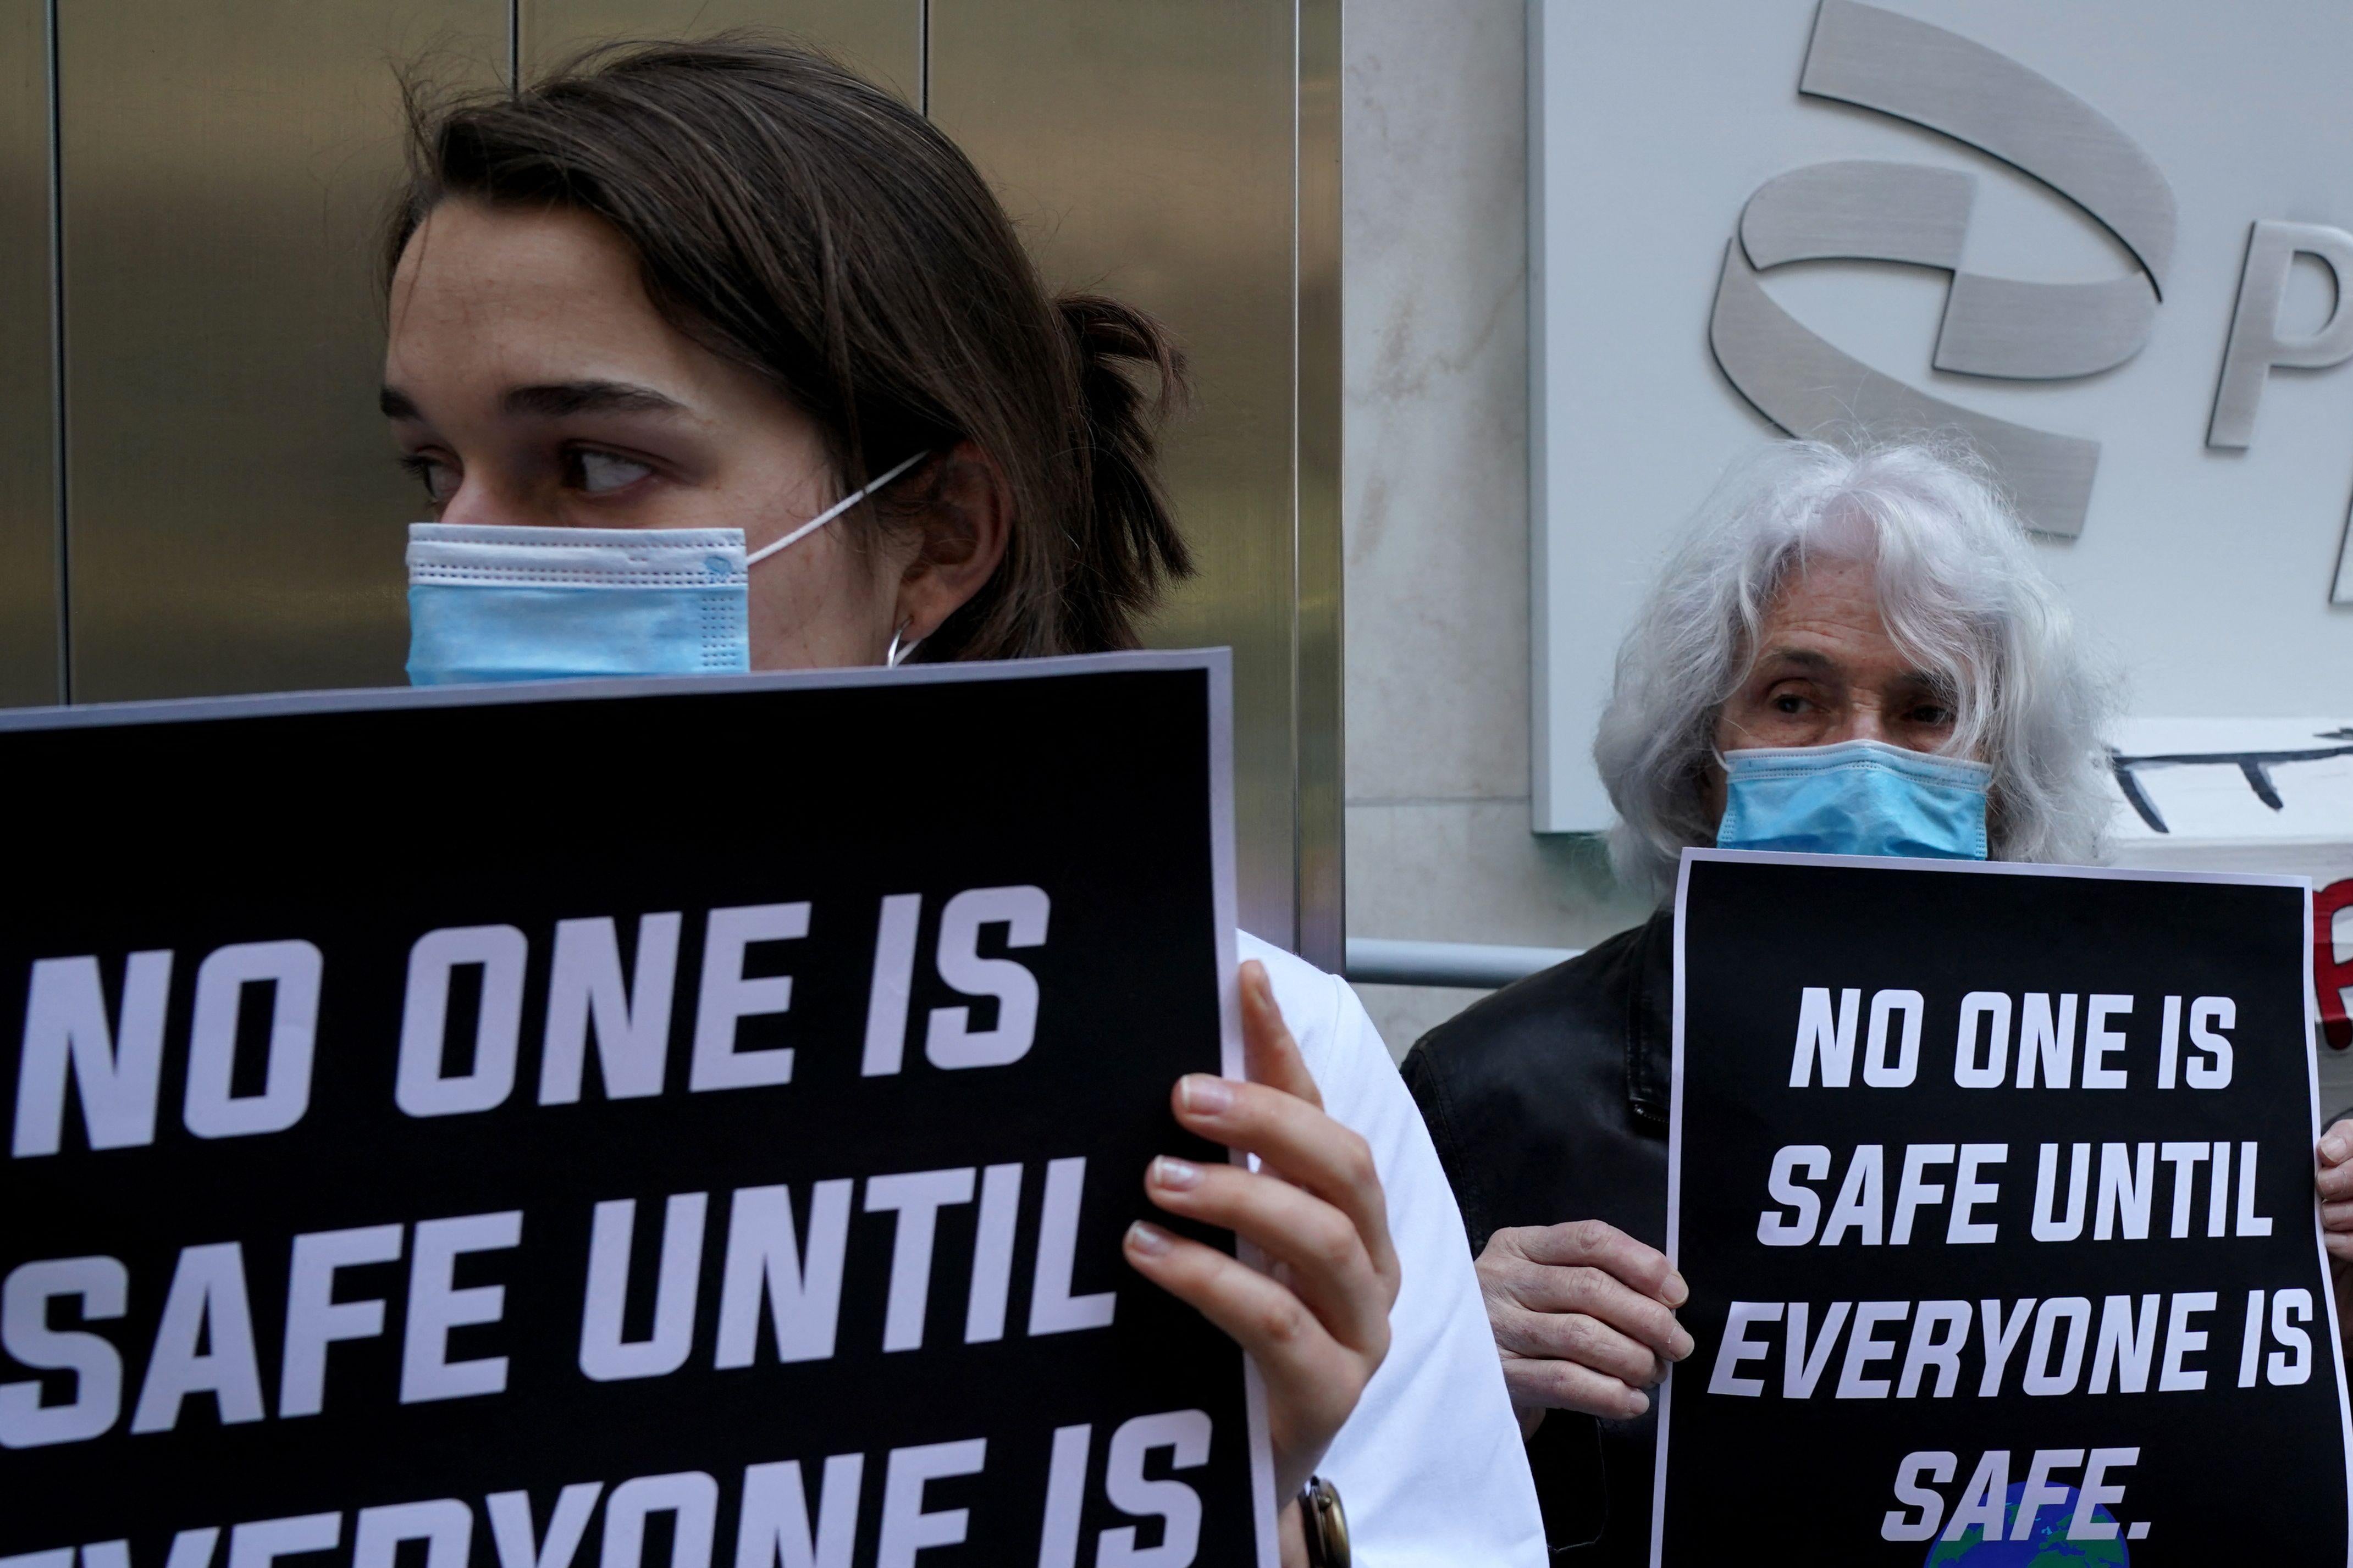 People hold signs that say "No one is safe until everyone is safe" in front of the Pfizer building in New York